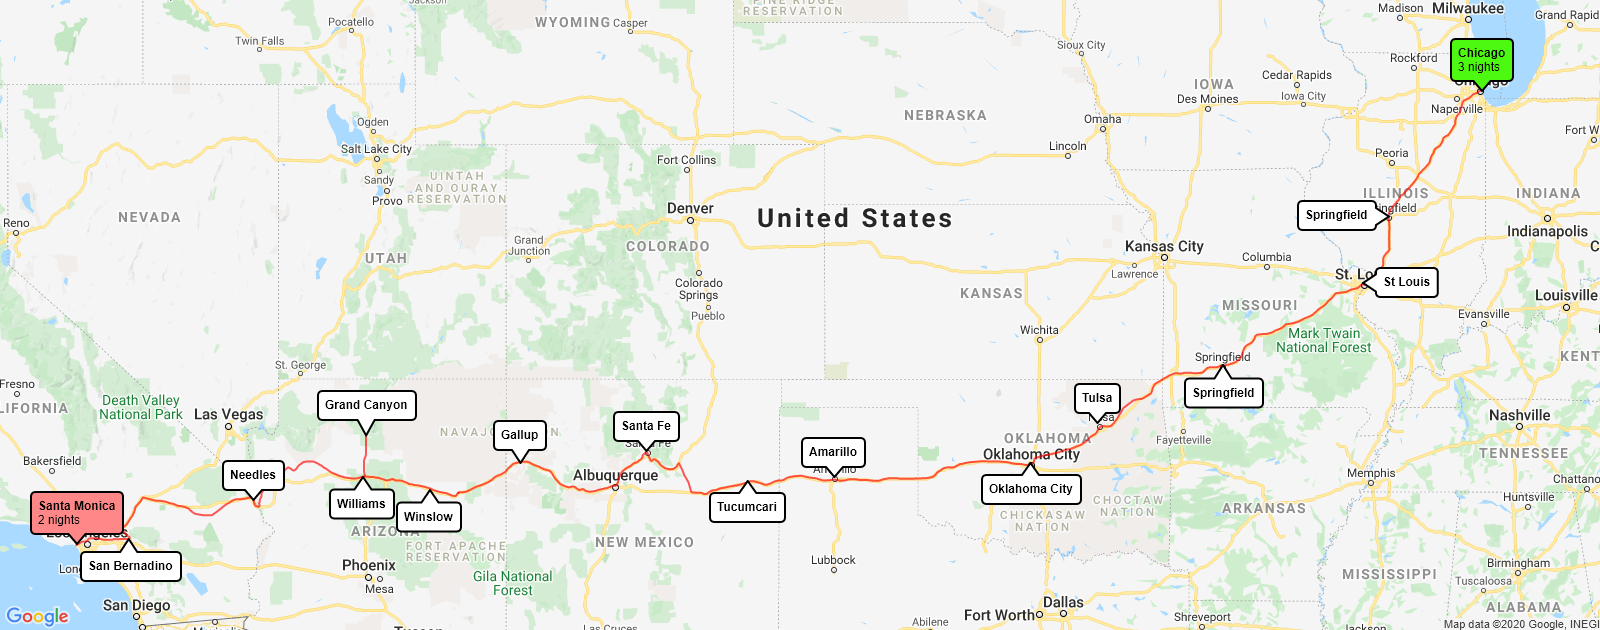 route 66 detailed map